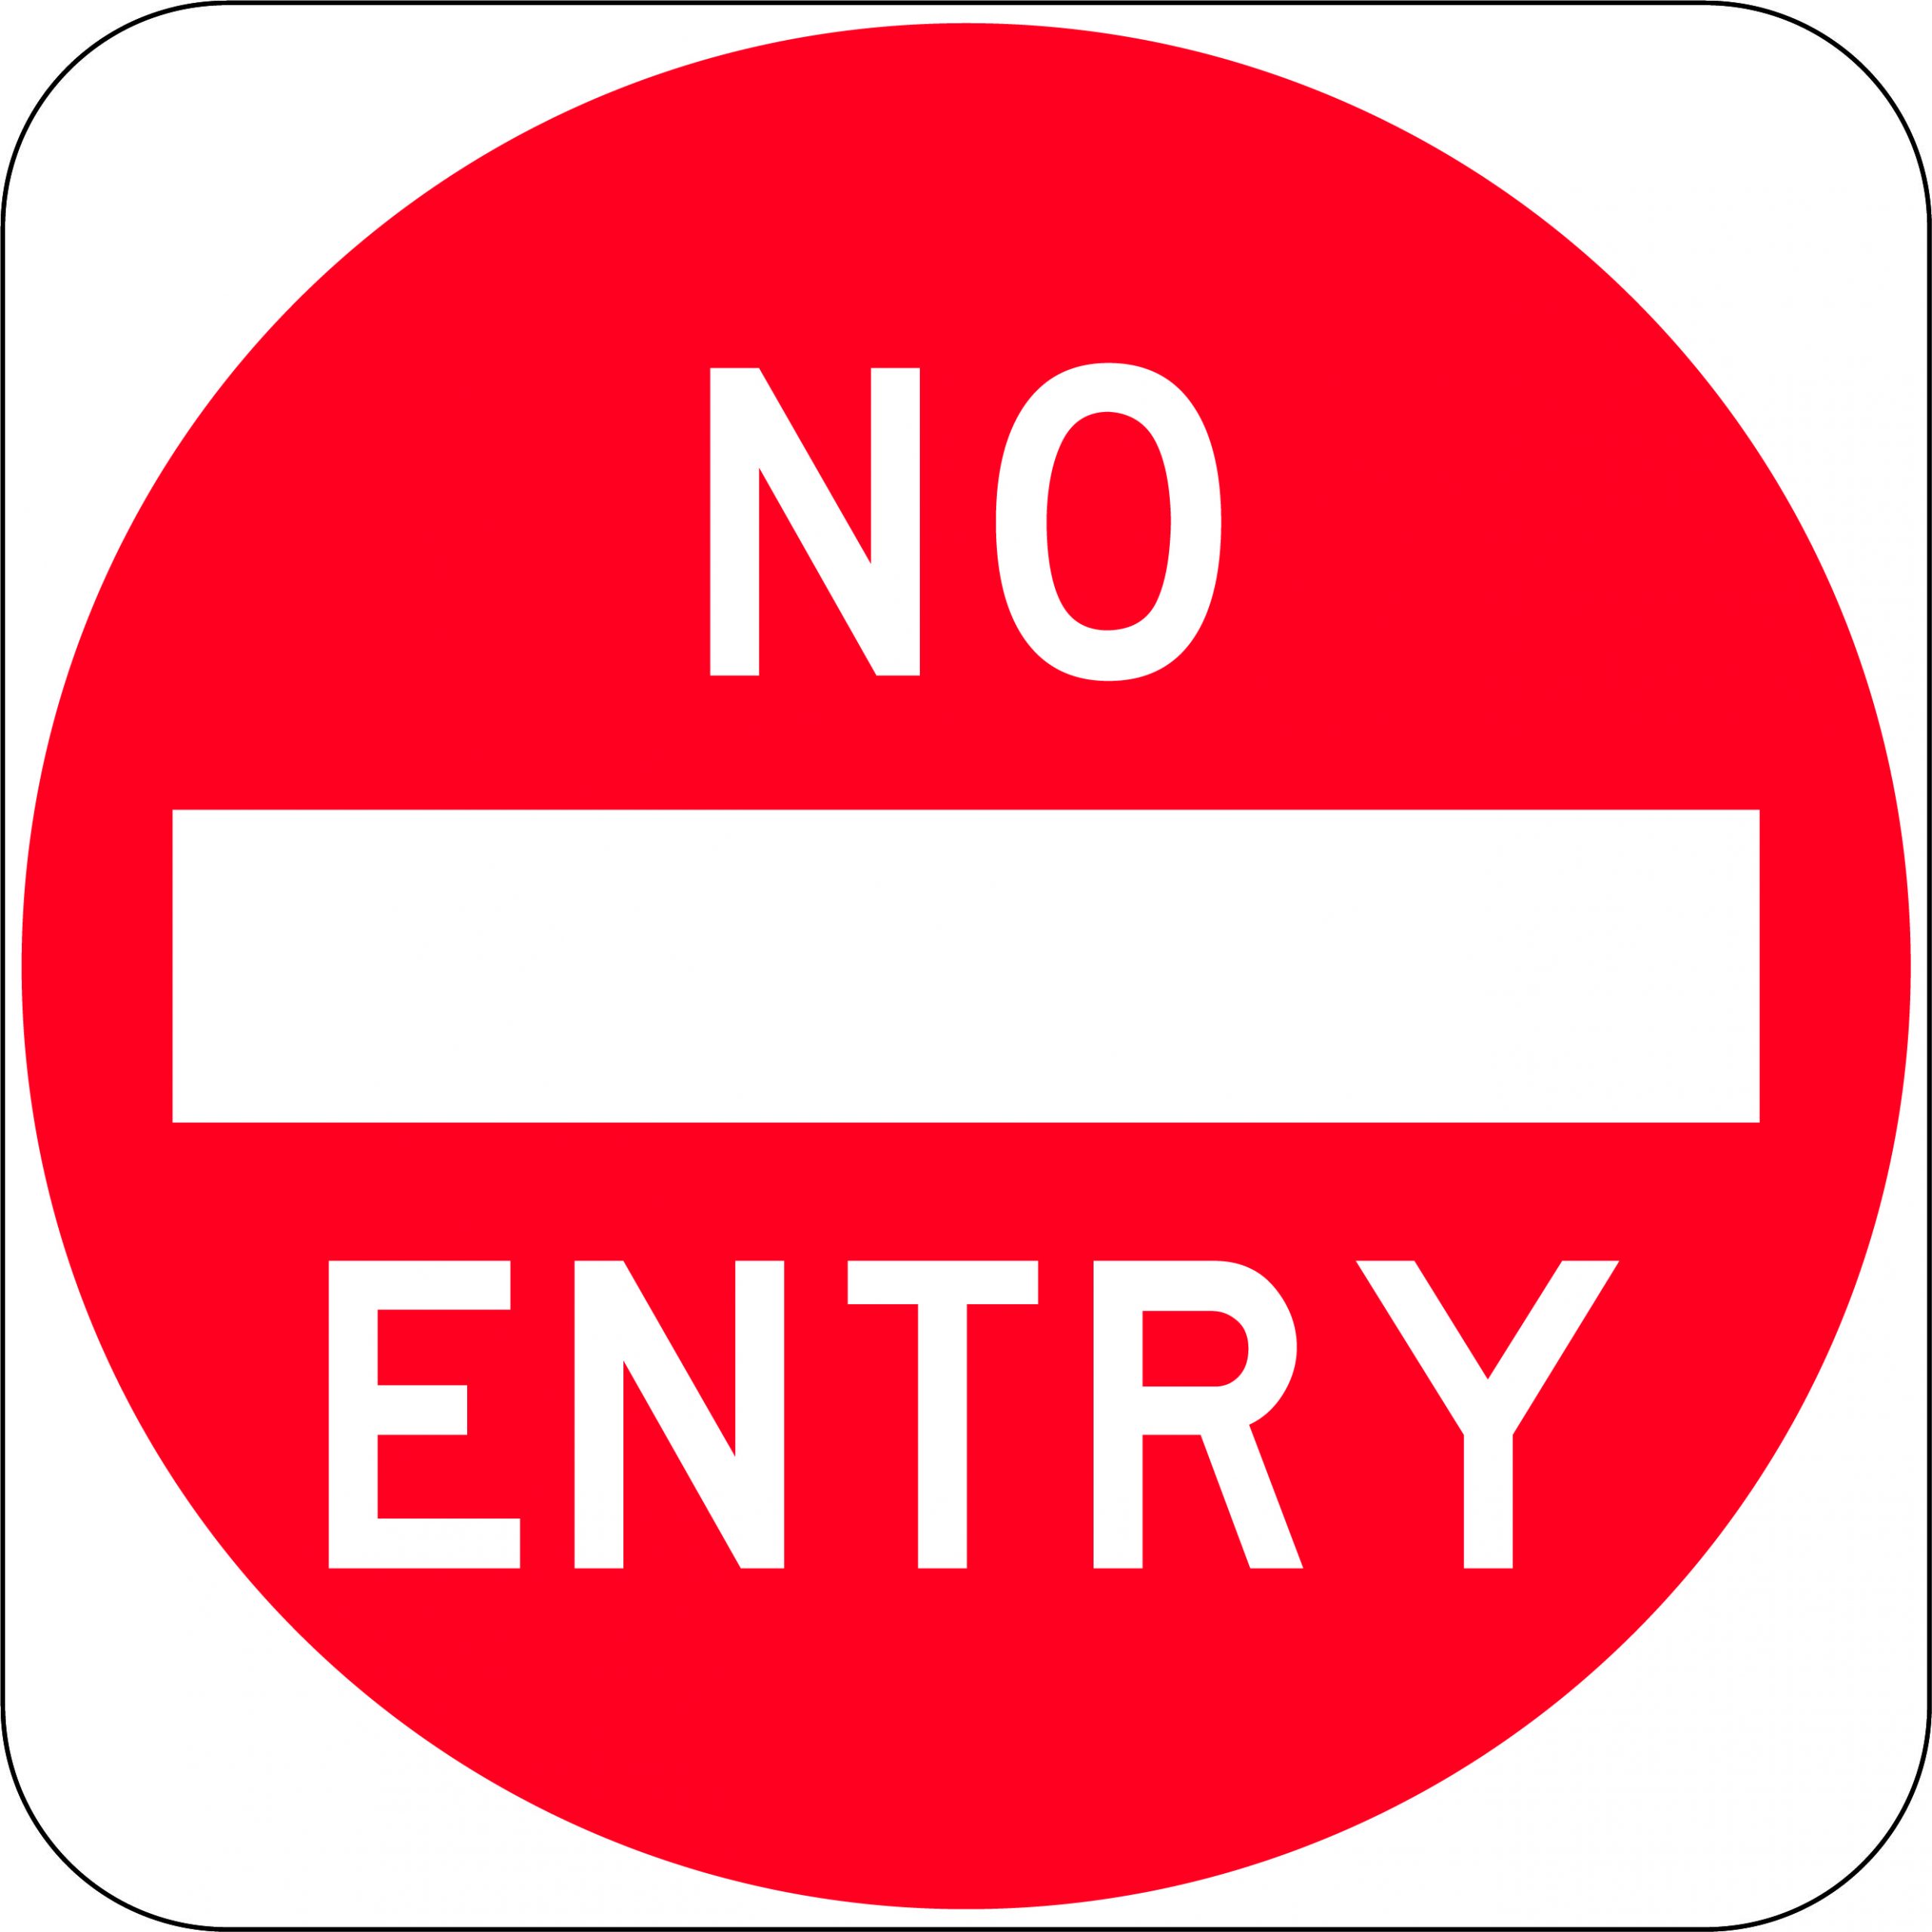 SIGN 600 X 1050MM CLASS 1 ALUMINIUM NO ENTRY AND SYMBOL NSW STANDARD